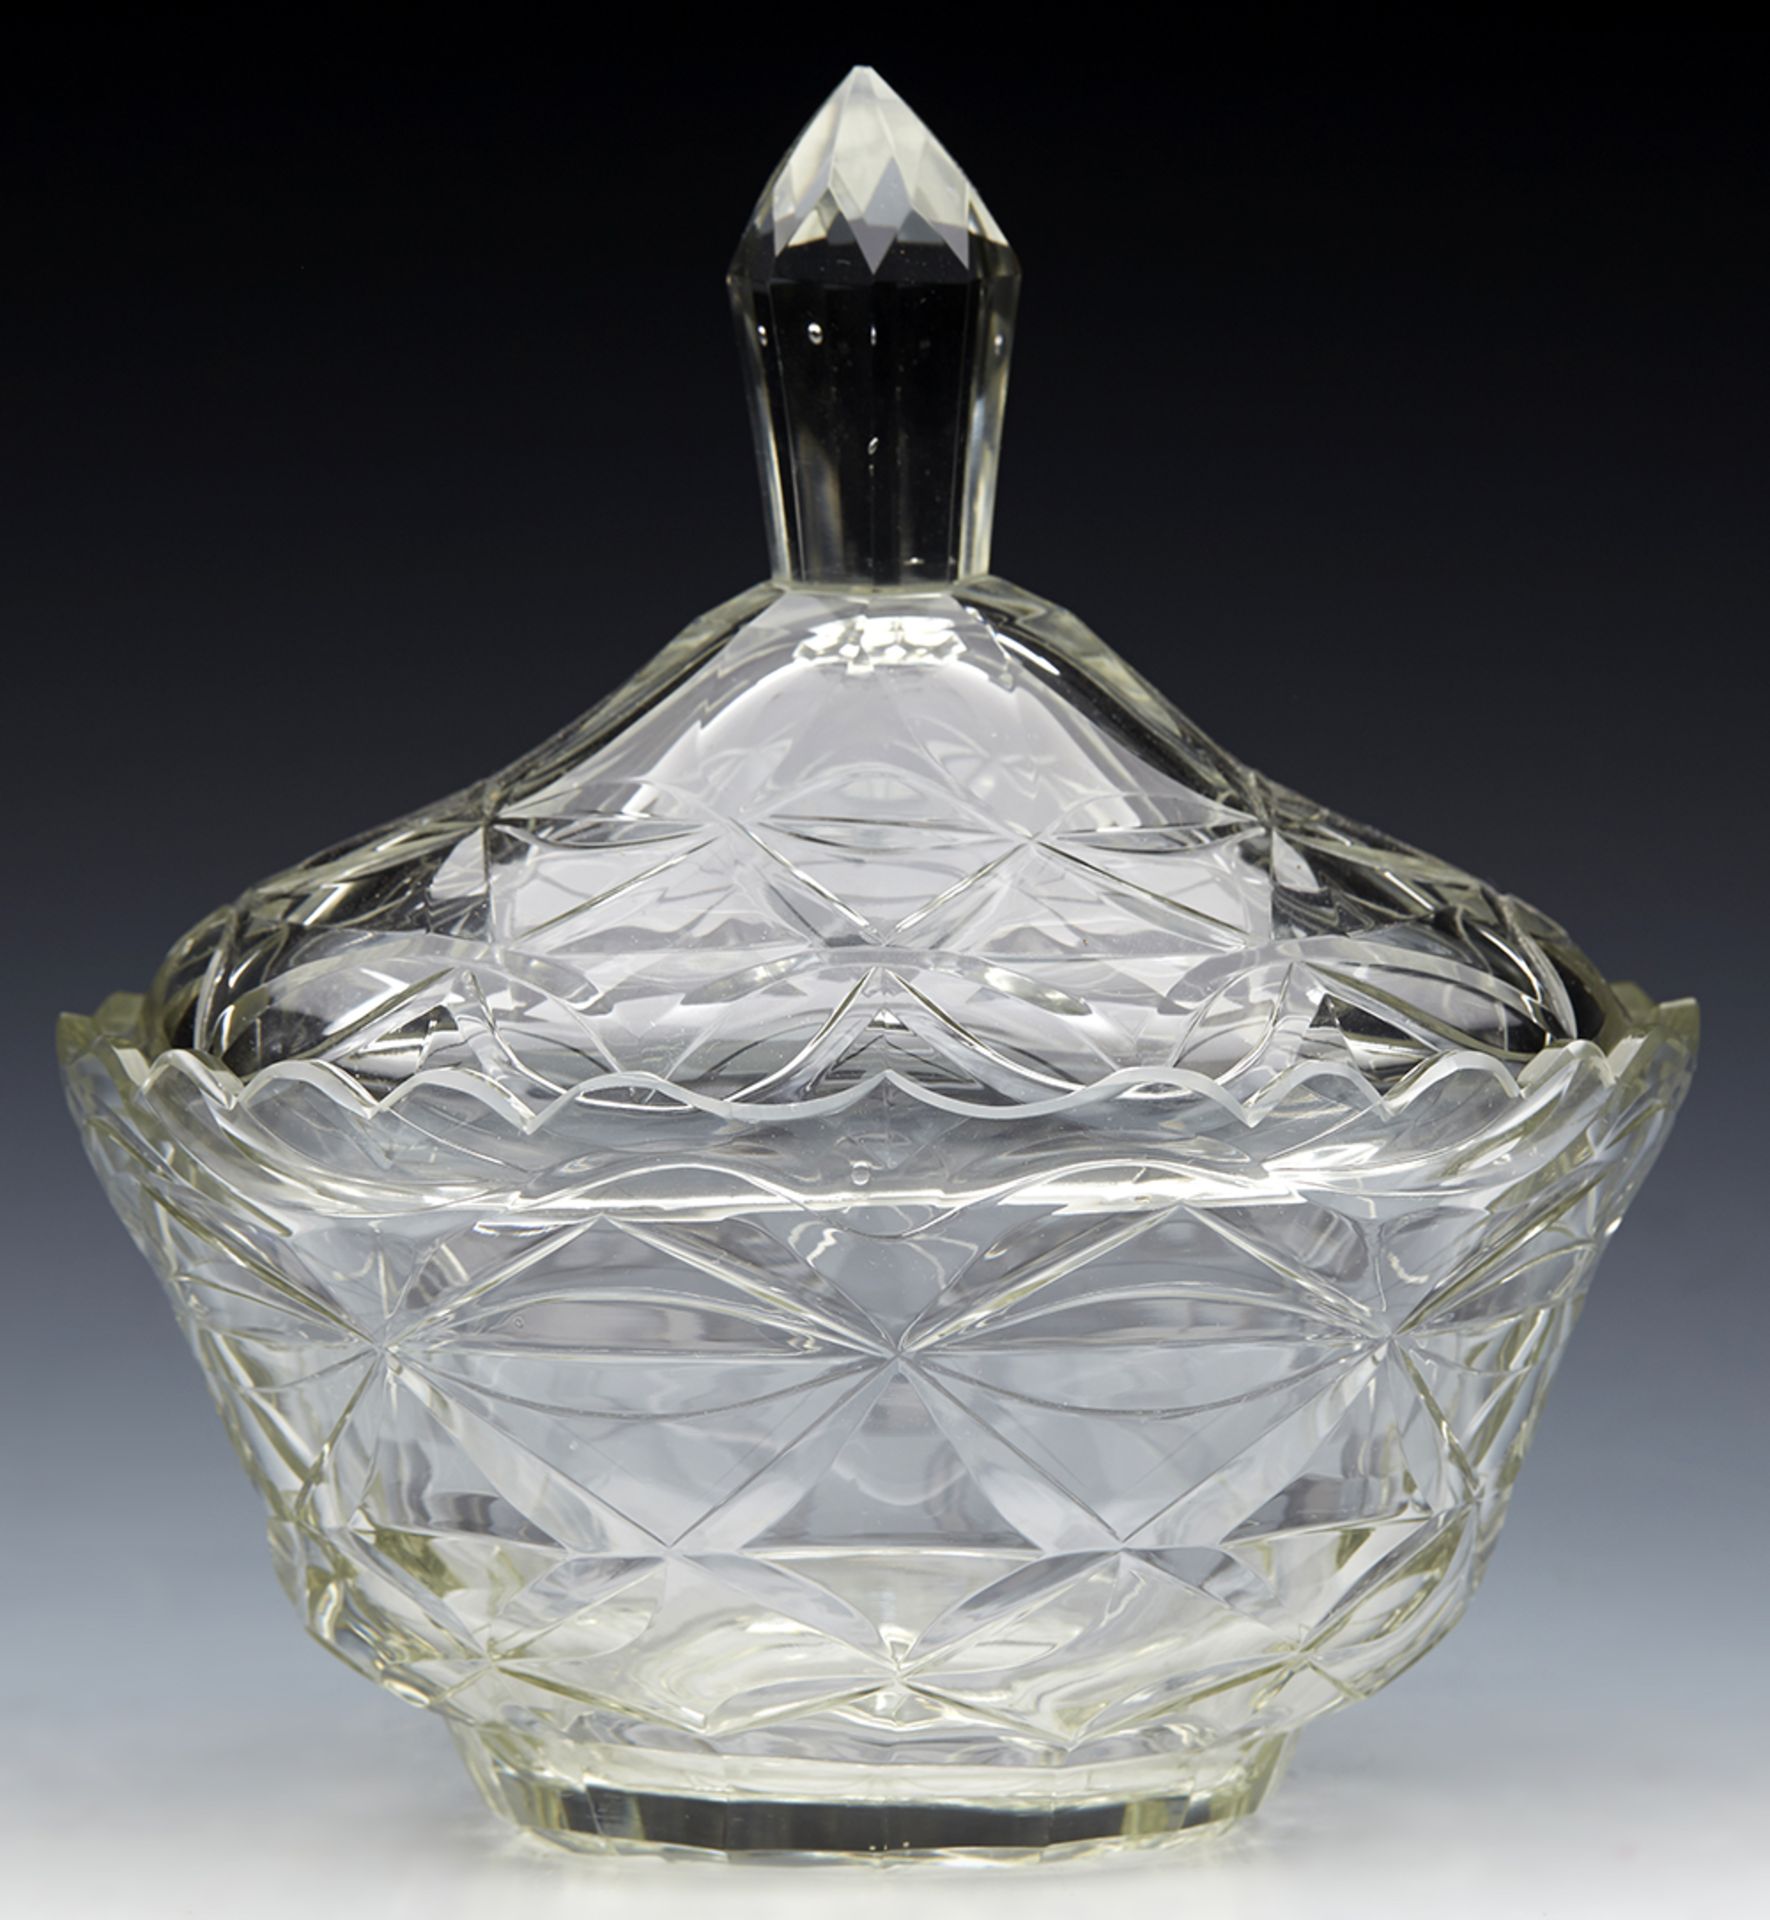 ANTIQUE CUT GLASS LIDDED BUTTER DISH AND STAND EARLY 19TH C.   DIMENSIONS   Height 19cm, Length 25, - Image 13 of 15